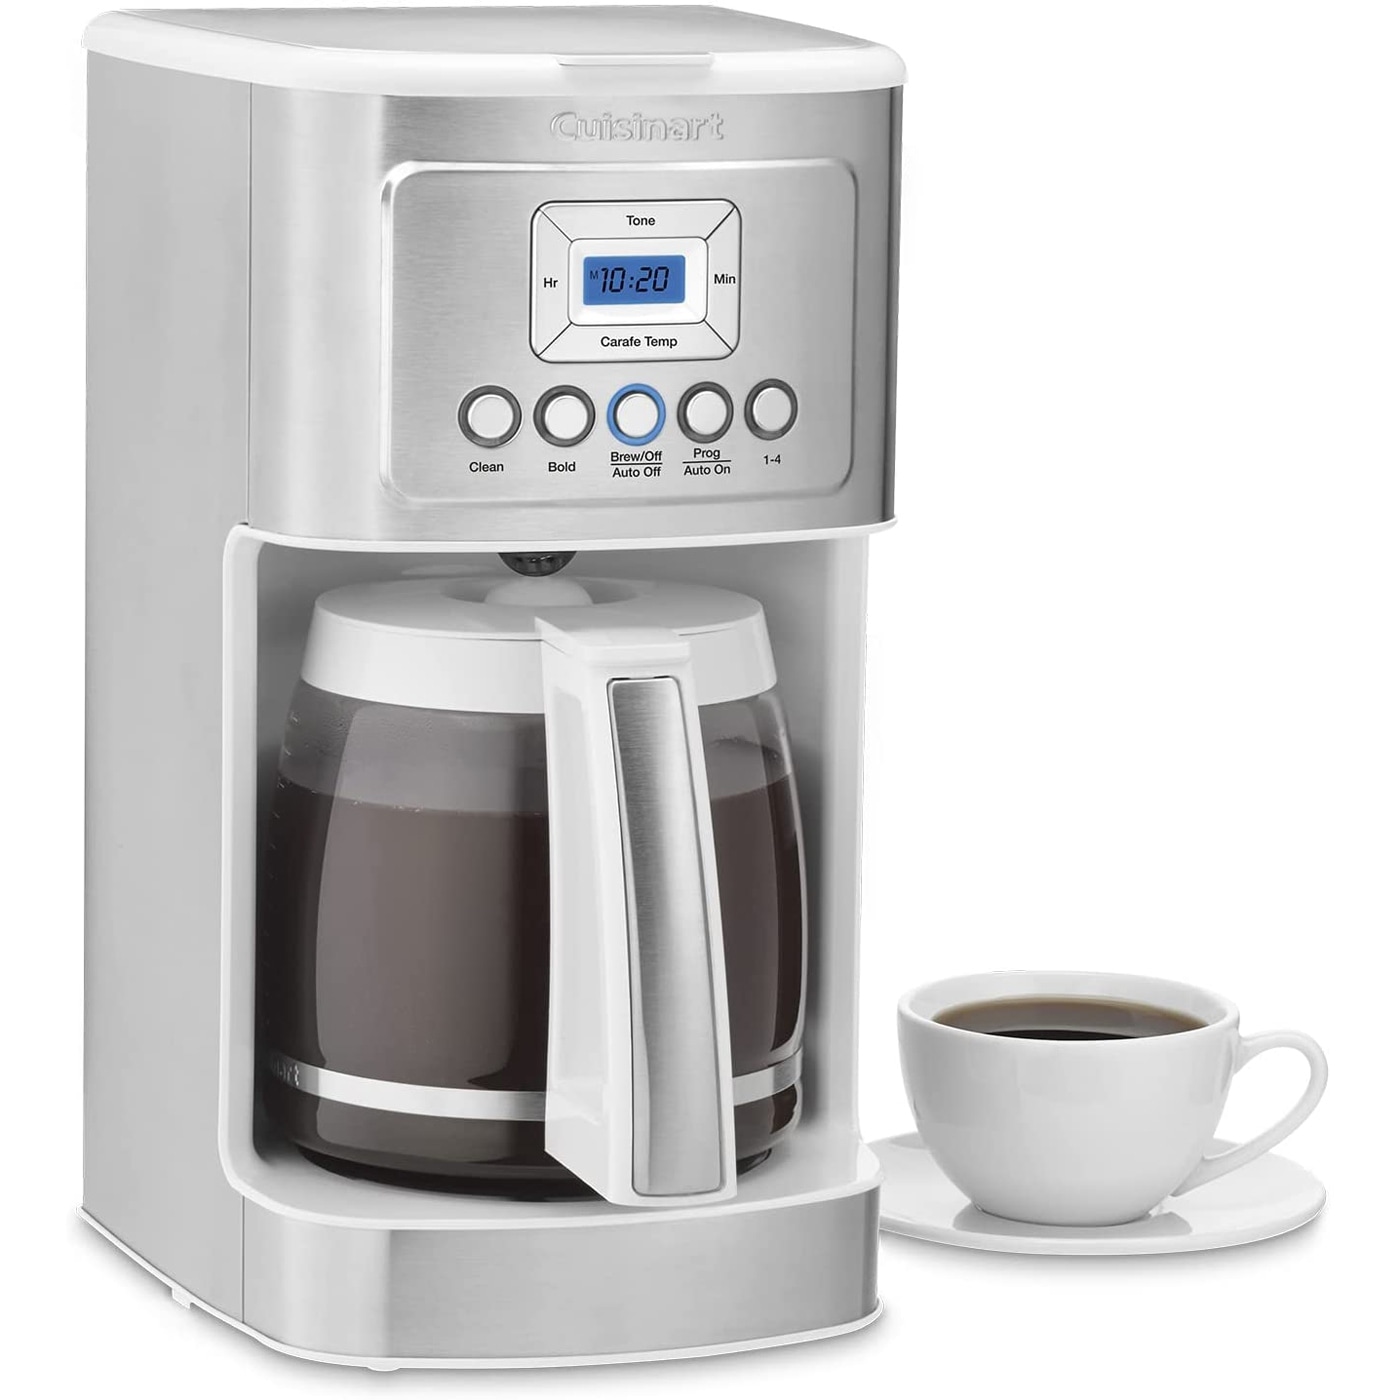 https://ak1.ostkcdn.com/images/products/is/images/direct/1e797180af445f9306004a4f19476263bffc0a19/Cuisinart-Perfectemp-Coffee-Maker-14-Cup-Glass%2C-Refurbished.jpg